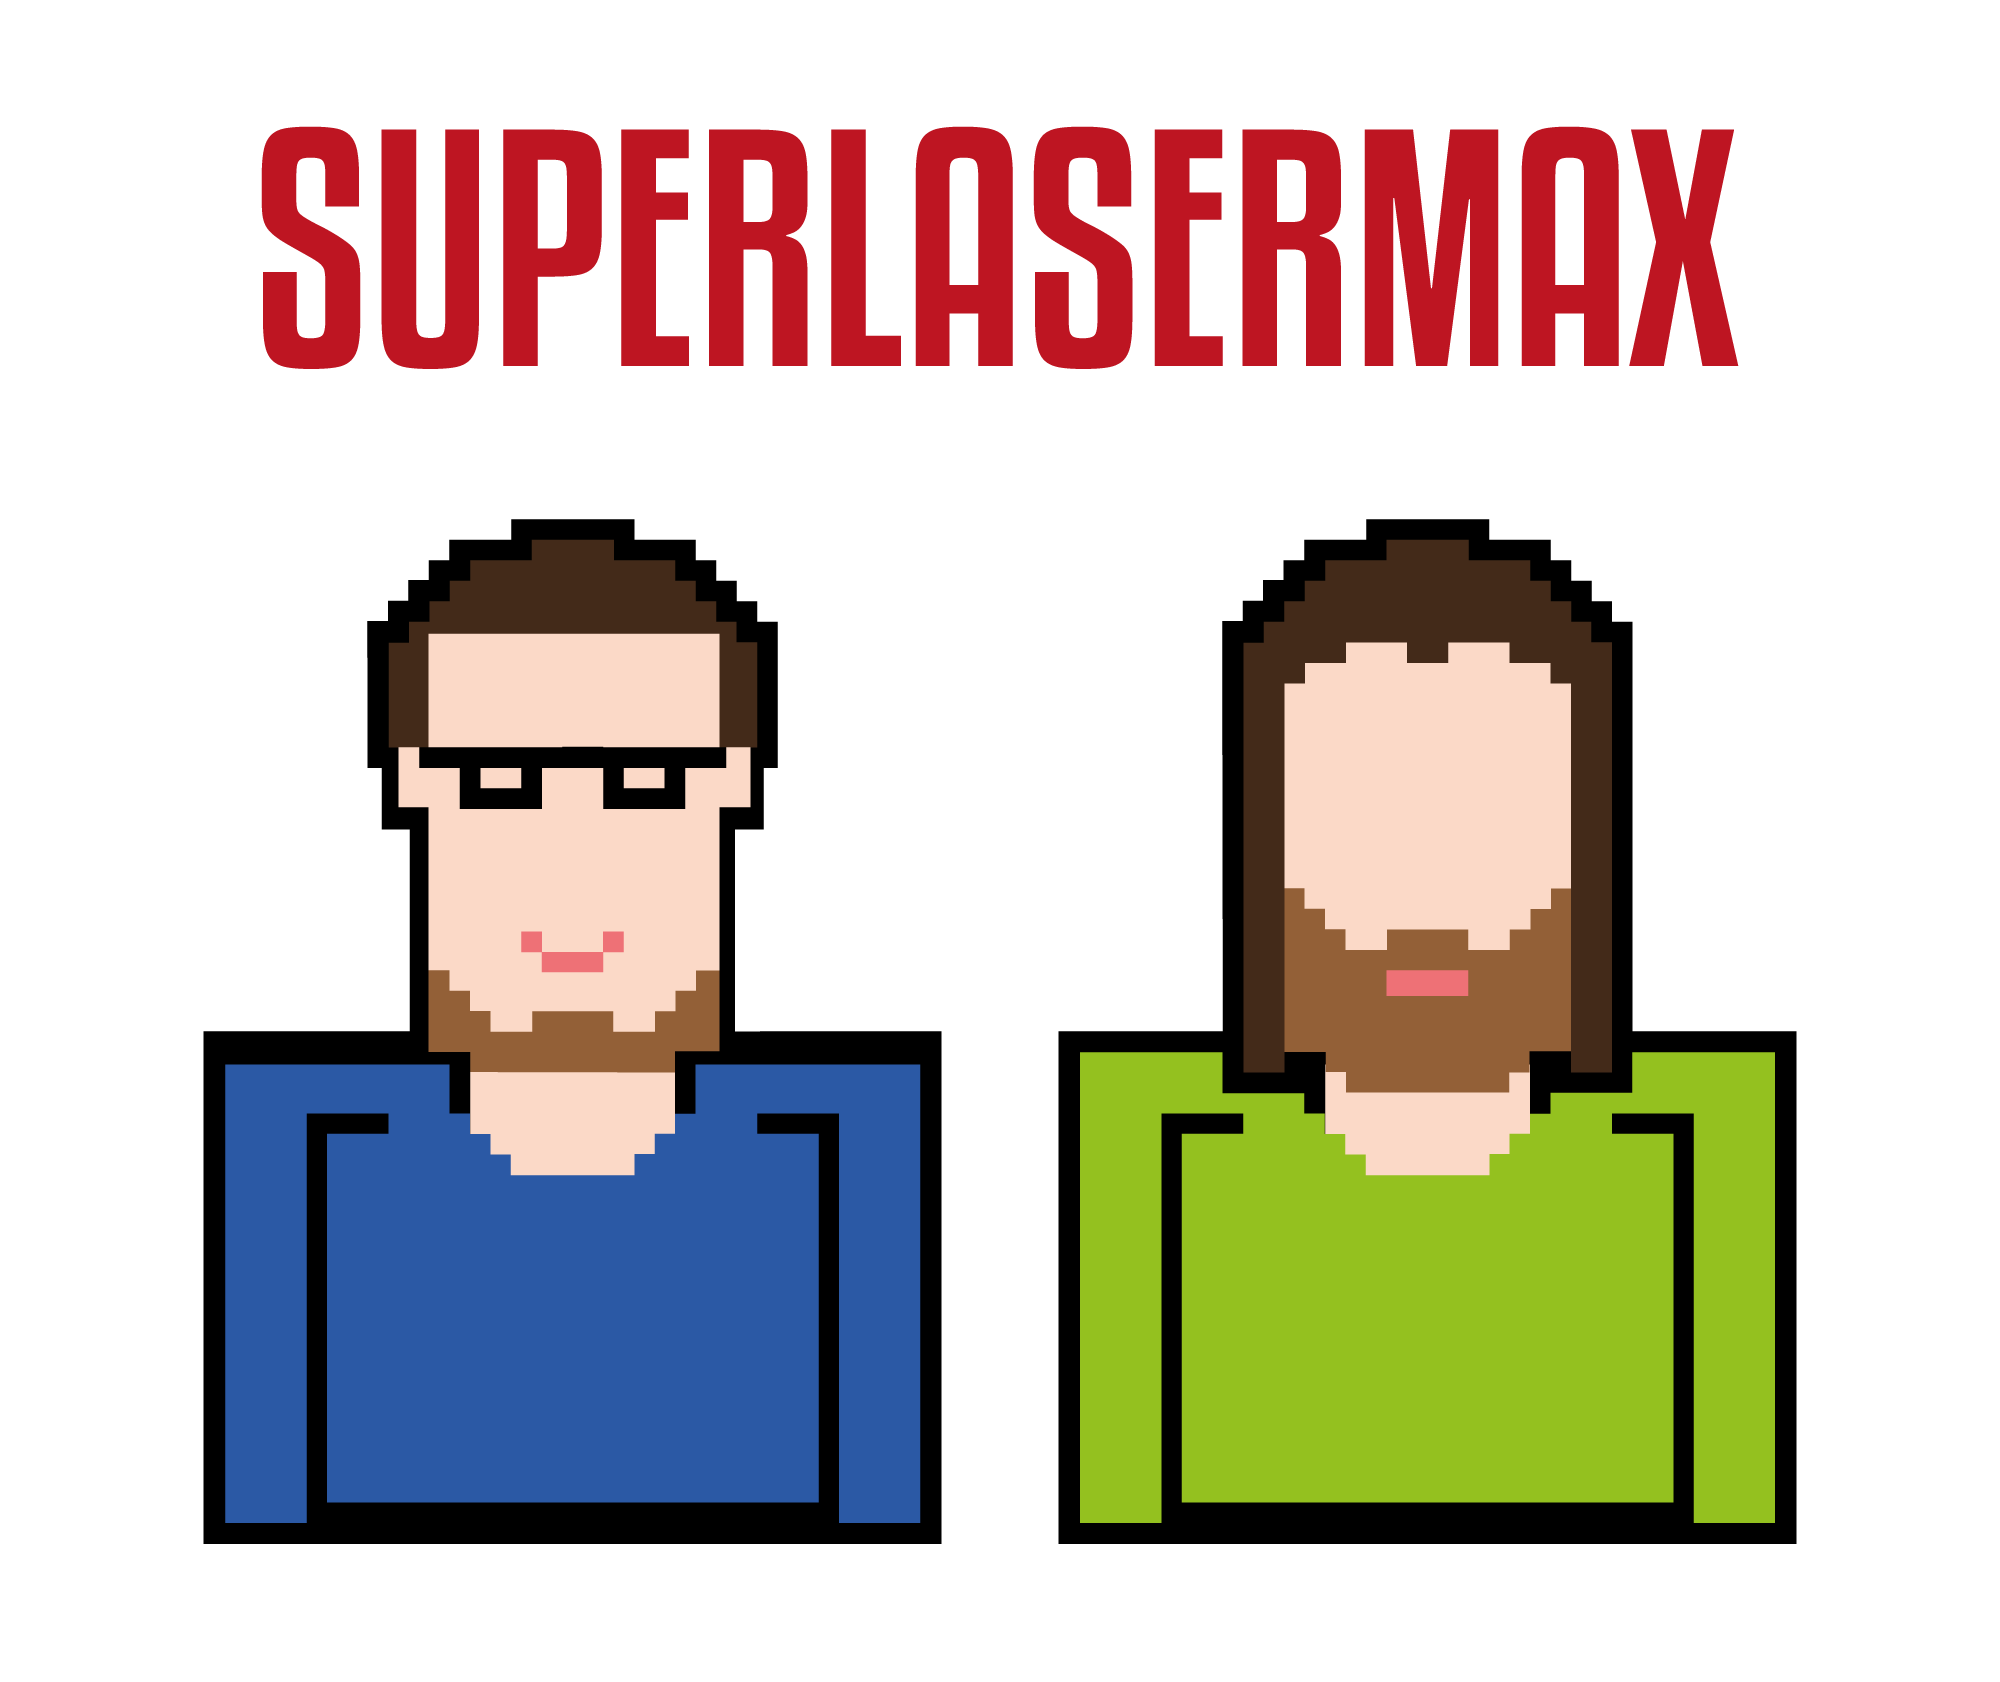 SuperLaserMax is a podcast and audio production duo in Buffalo, NY.